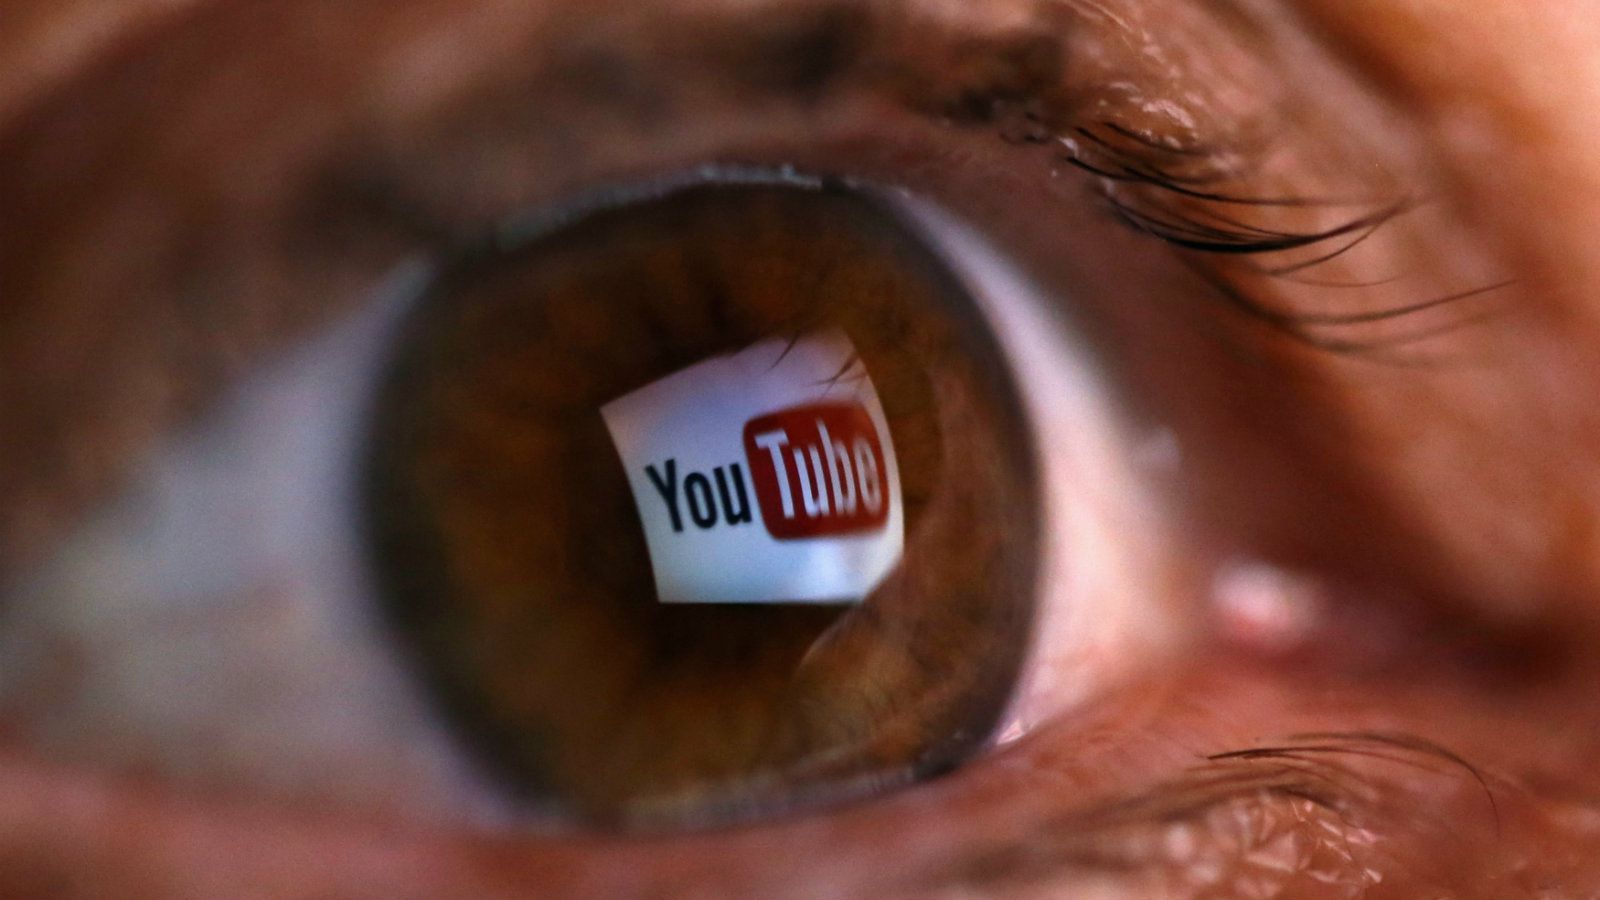 Image: YouTube alters search results to appease pro-abortion Leftists who seek total domination over all online content